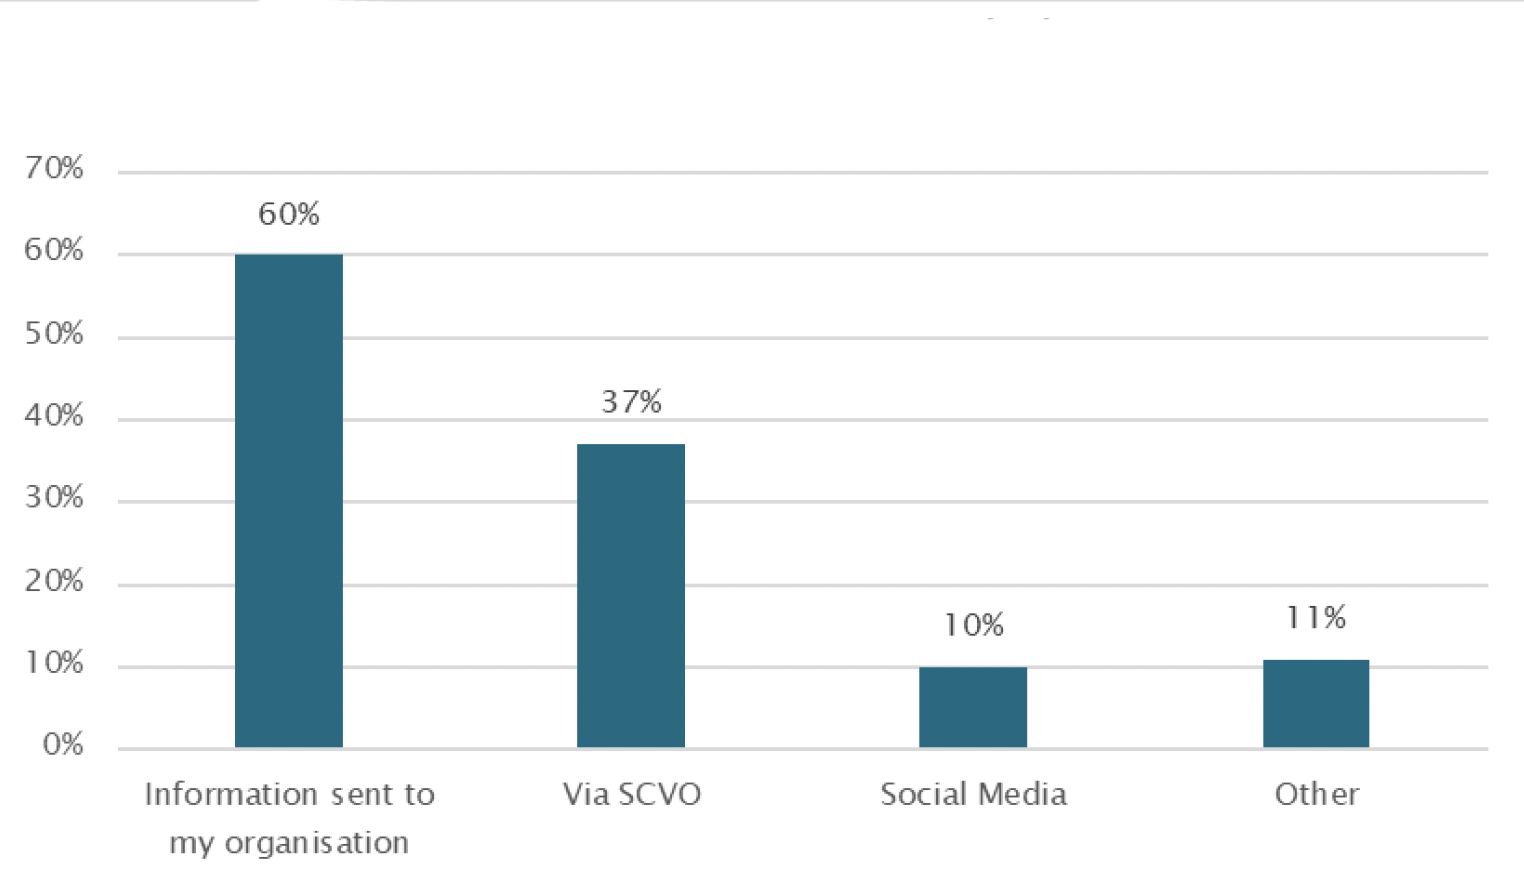 Bar chart shows that 60% of organisations were directly sent information about Connecting Scotland. 37% heard about it through SCVO, 10% through social media and 11% in another way.